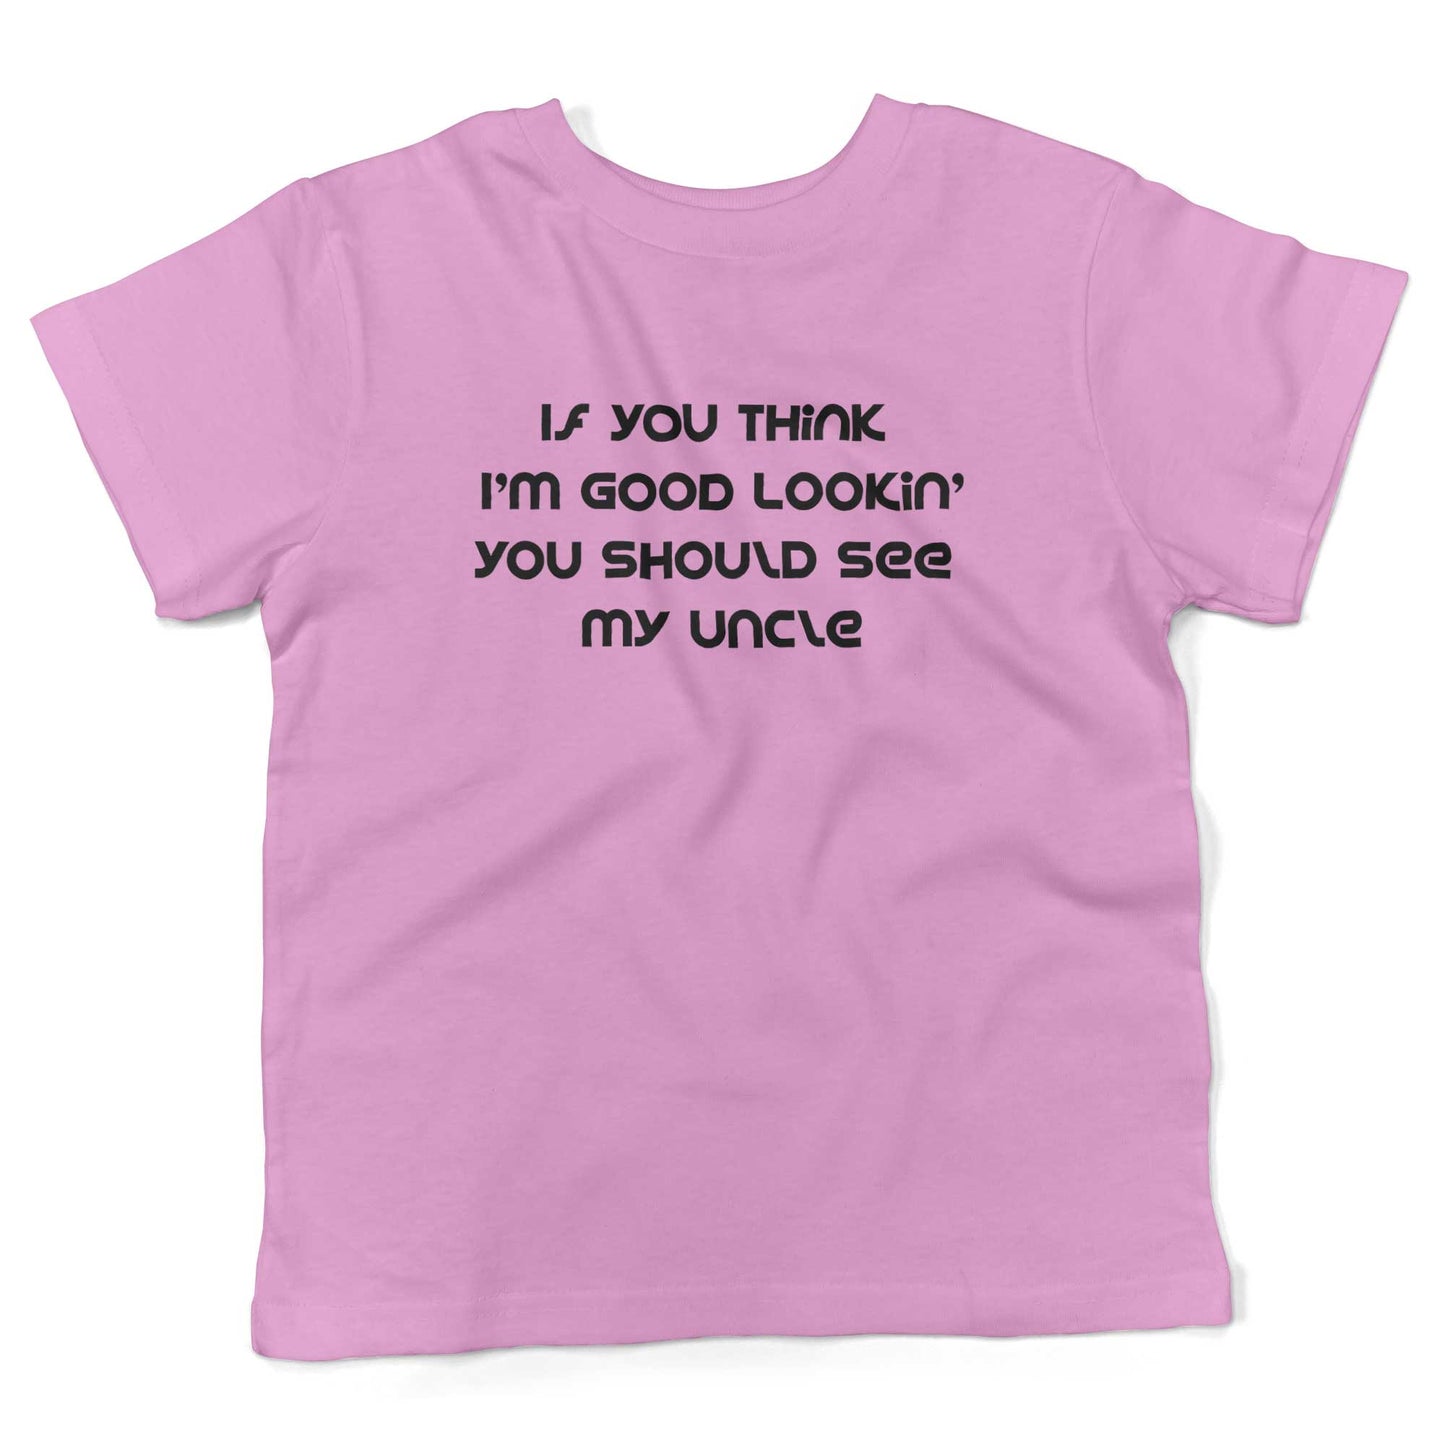 If You Think I'm Good Lookin' You Should See My Uncle Toddler Shirt-Organic Pink-2T